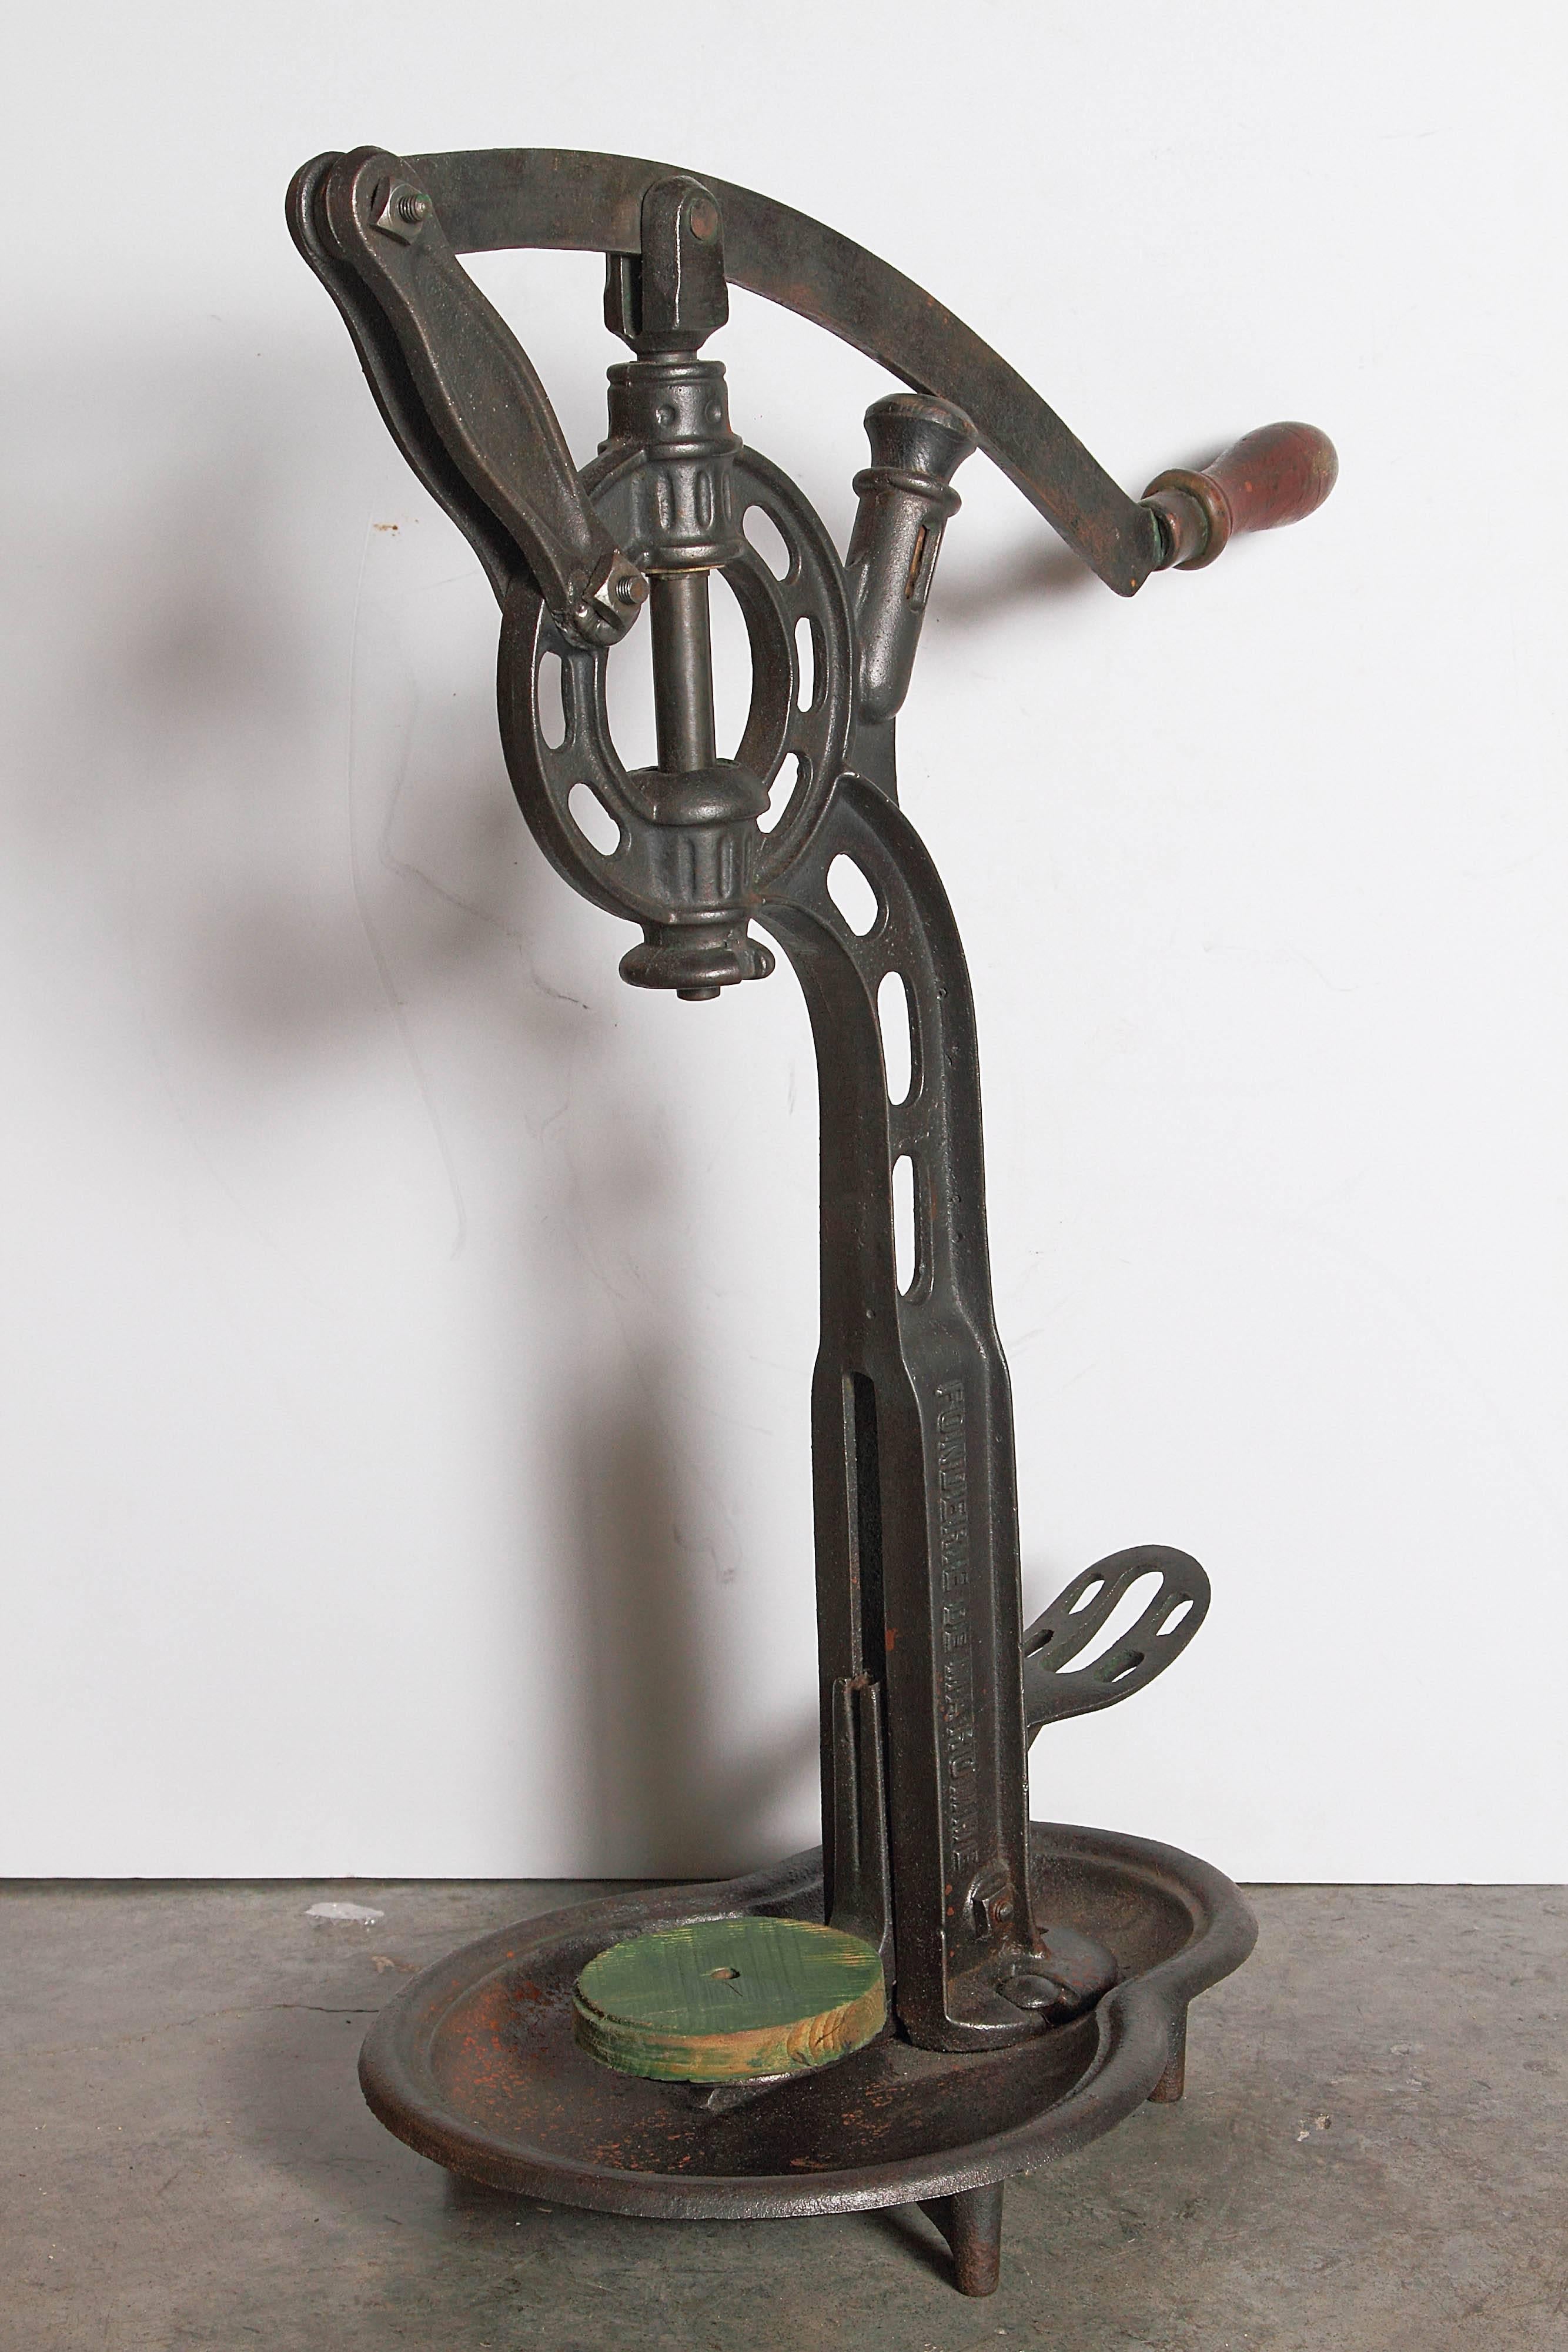 This antique French cast iron wine corker has foundry marks of Fonderie de Maromme on its horizontal shaft and its tray.  Its iron arm has a shaped wooden handle for corking the wine bottle. 
 
These are often used as a wonderful accessory in wine